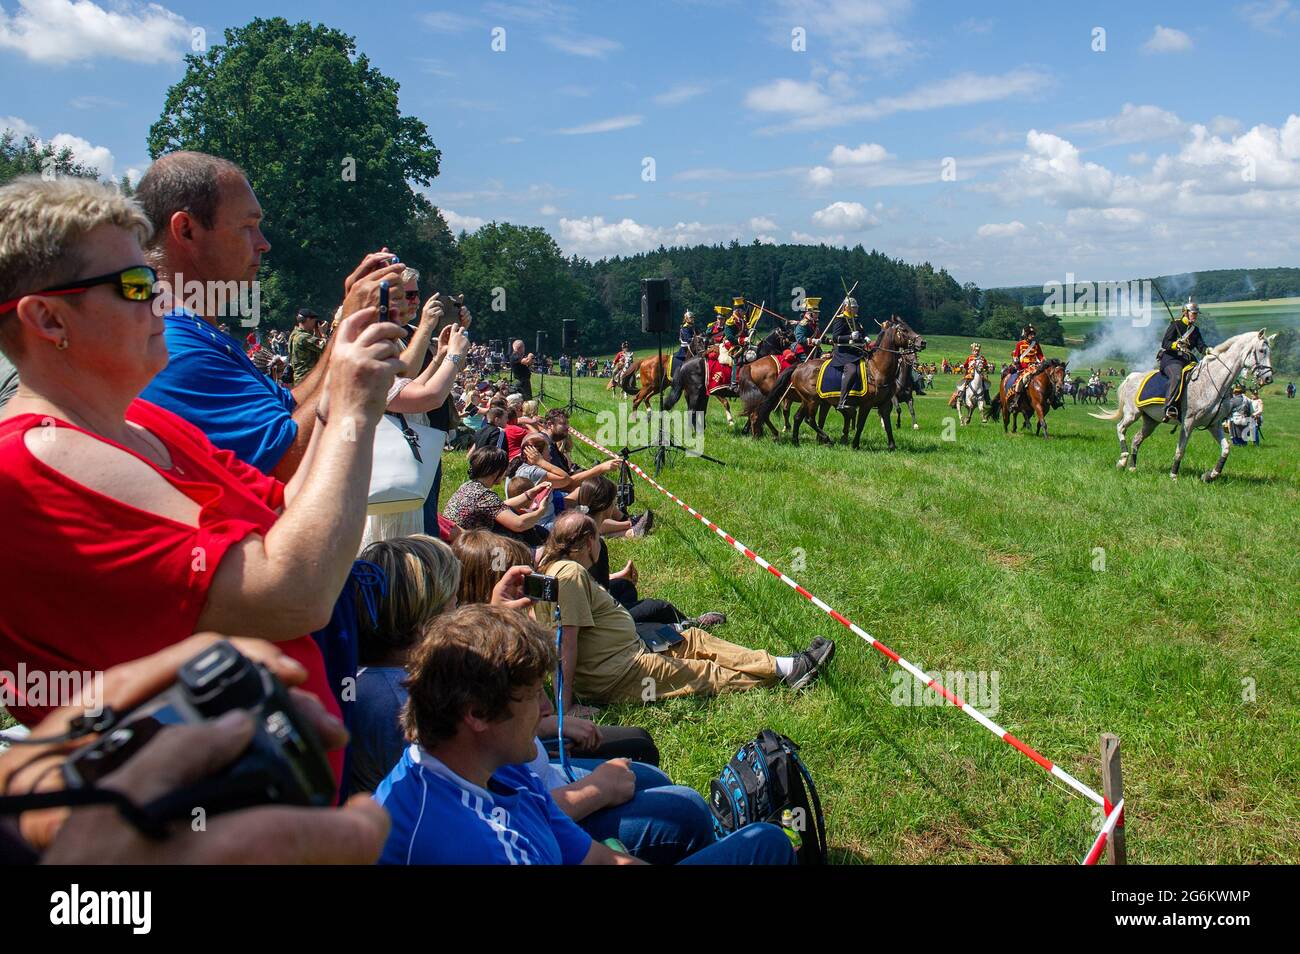 Chlum, Czech Republic. 03rd July, 2021. The Battle of Koniggratz that had occurred between Austrian and Prussian soldiers in 1866 was re-enacted on the battlefield in Chlum, Czech Republic, on July 3, 2021, and roughly 1,500 people came to see it. Credit: David Tanecek/CTK Photo/Alamy Live News Stock Photo